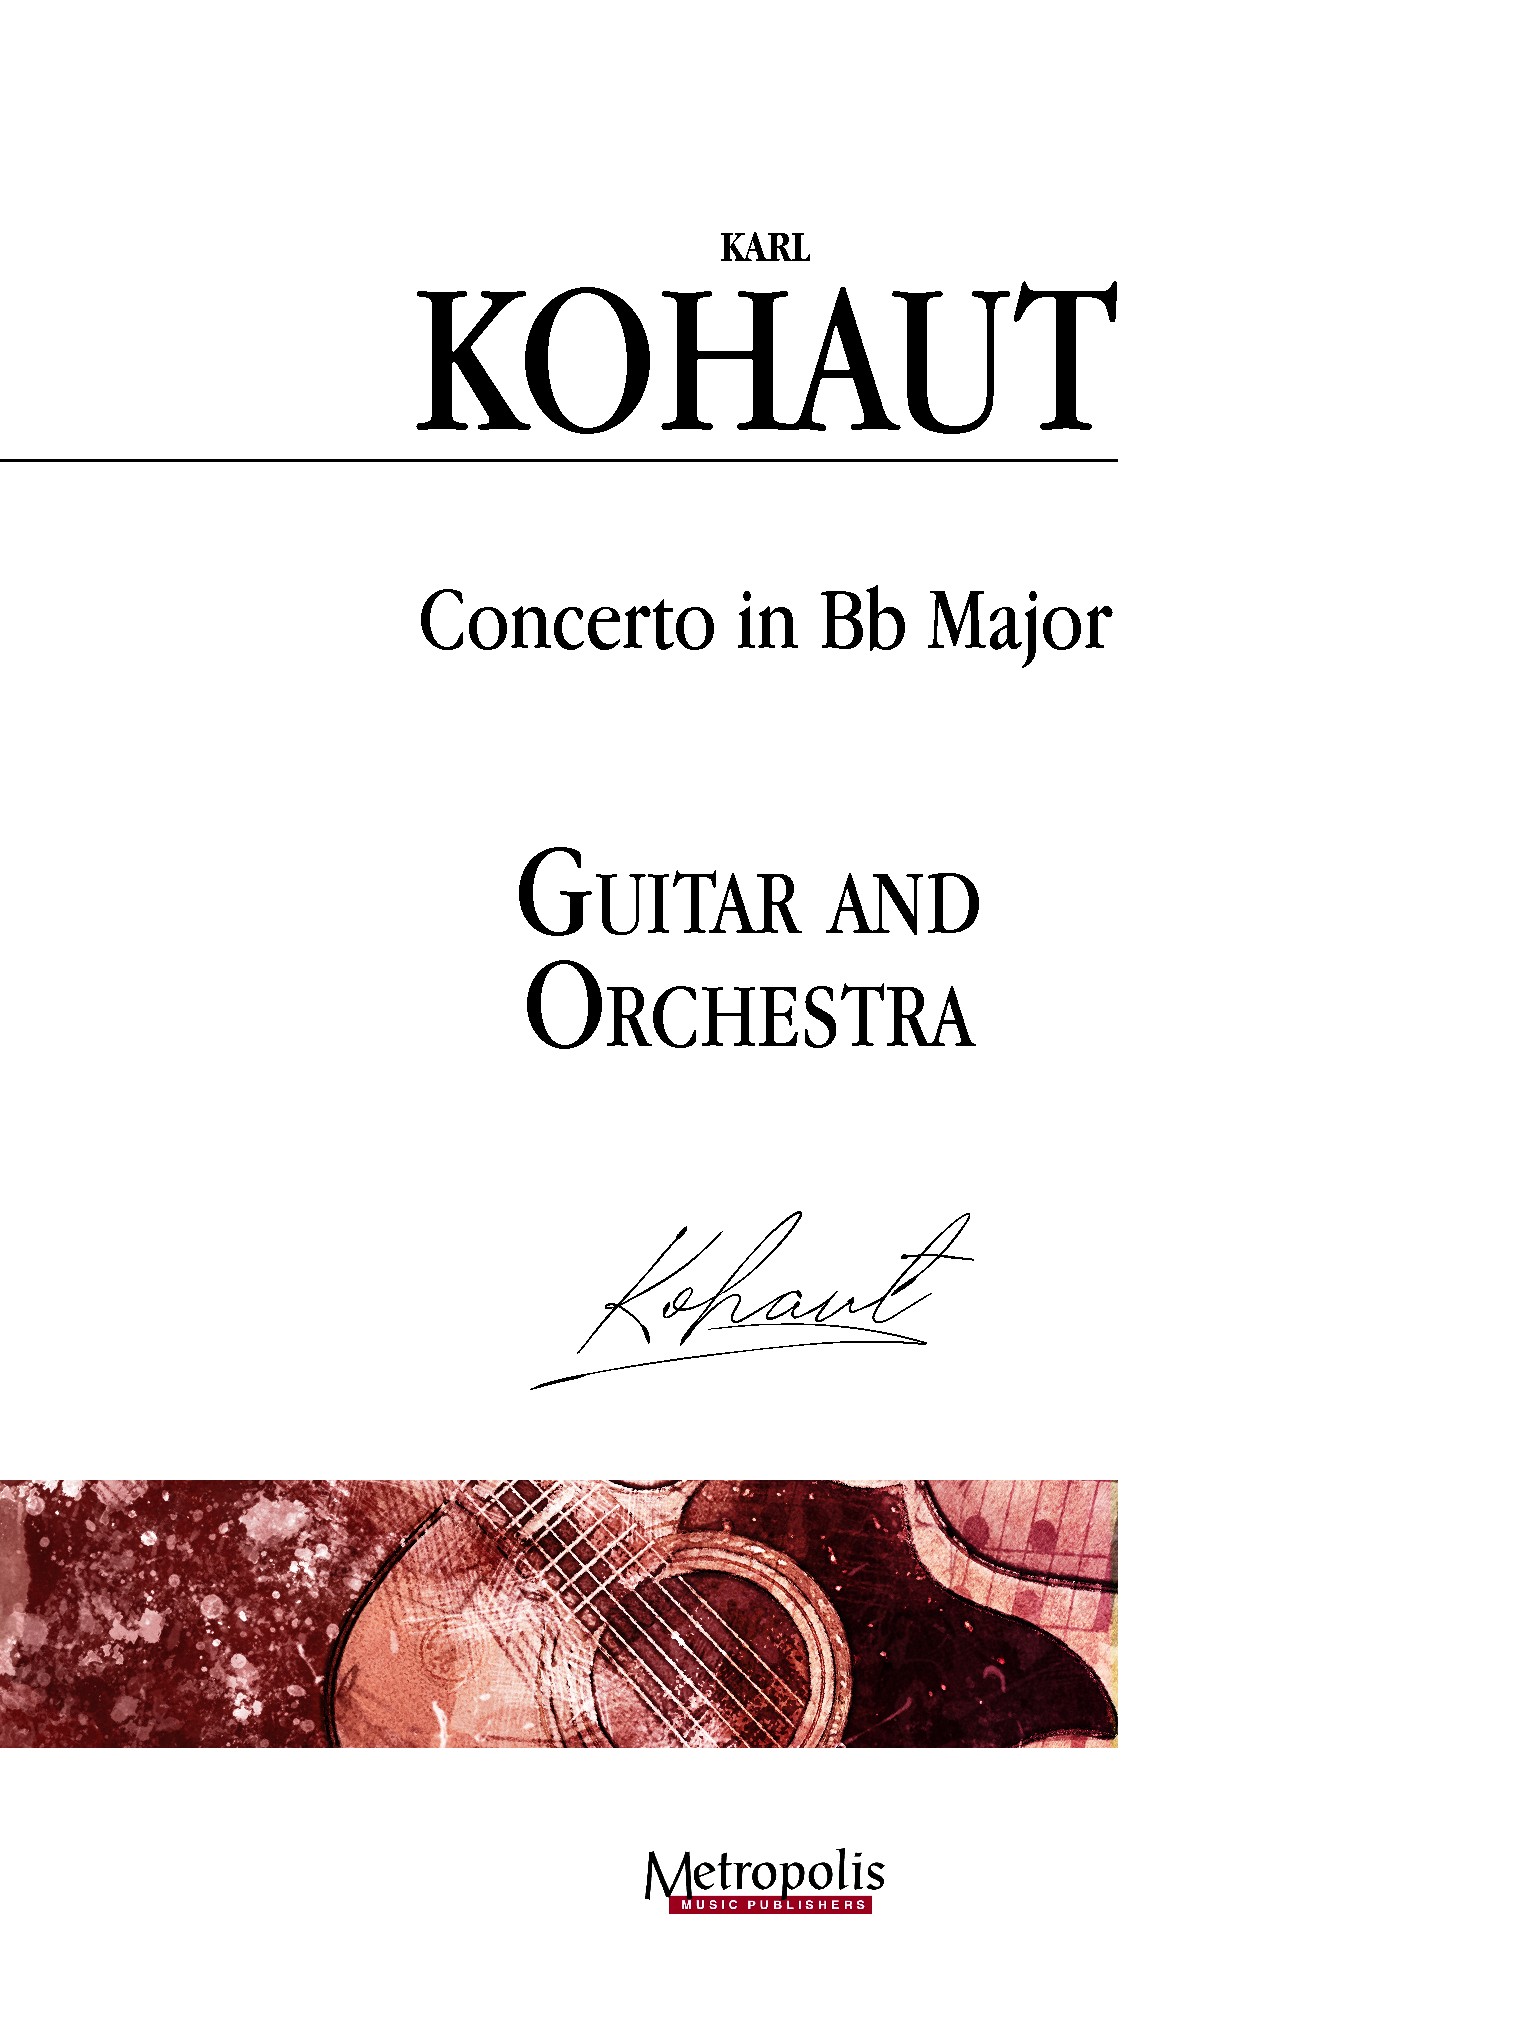 Karl Kohaut: Concerto in B-flat Major: Orchestra: Score and Parts